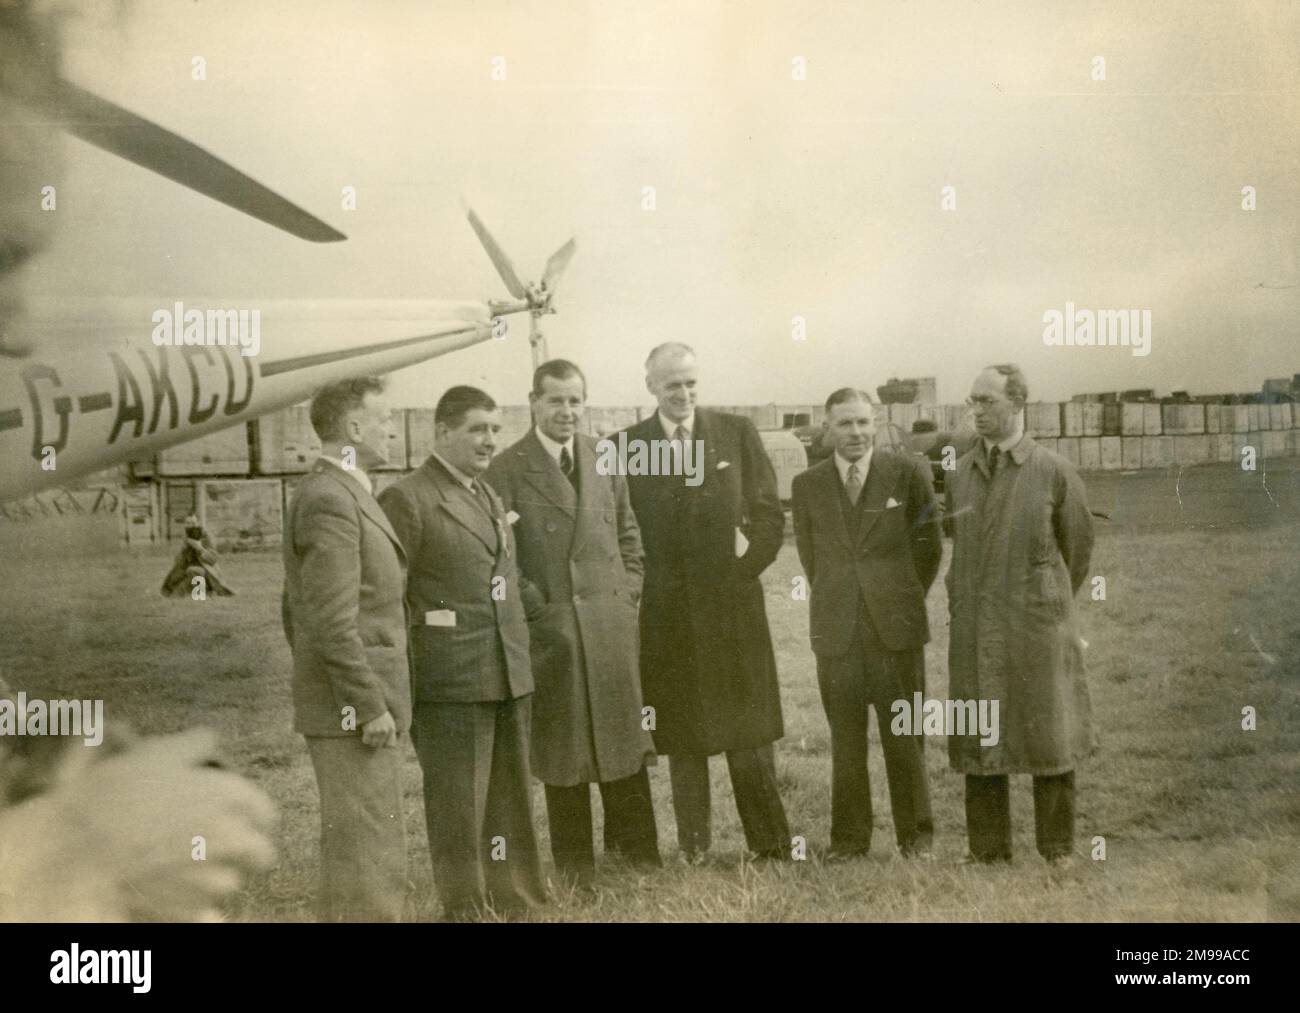 From left: GPO(?), Mayor of Peterborough(?); Gerard d?Erlanger, Chairman and Chief Executive, BEA; Word, Chief Executive, BSAA; Wg Cdr R.A.C. ?Reggie? Brie ; and N.E. Rowe, alongside Sikorsky S-51, G-AKCU, of BEA, at Peterborough, prior to the first helicopter-operated public mail service in the UK on 1 June 1948. Stock Photo